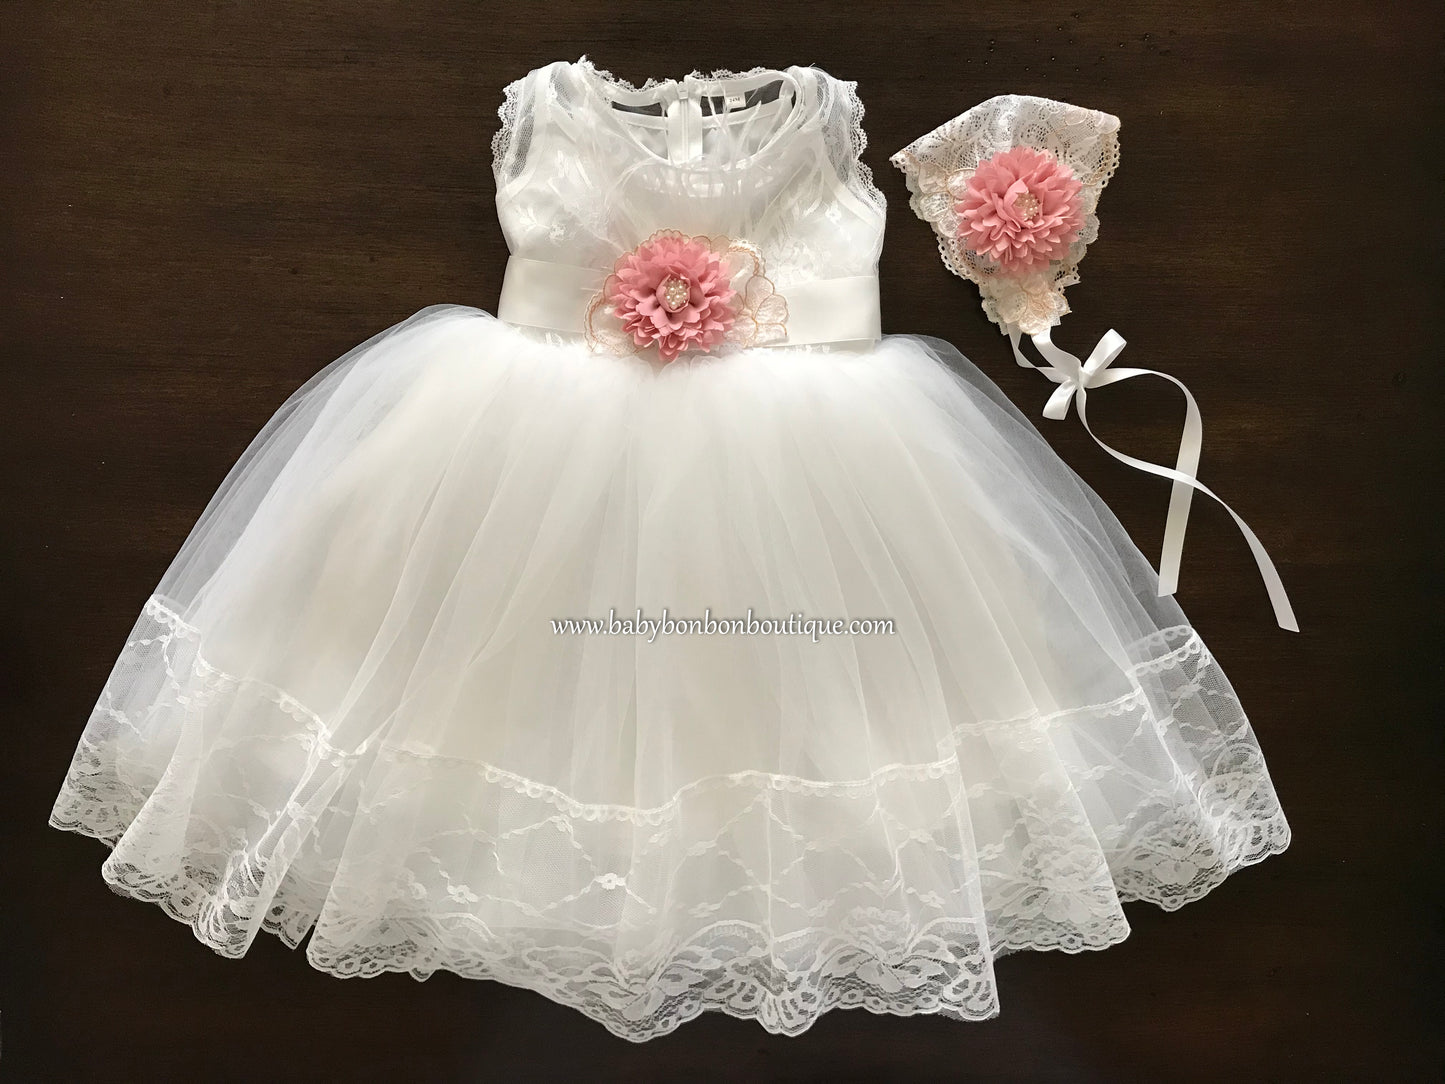 White Baptism Dress with Pink Flower Bonnet and Sash